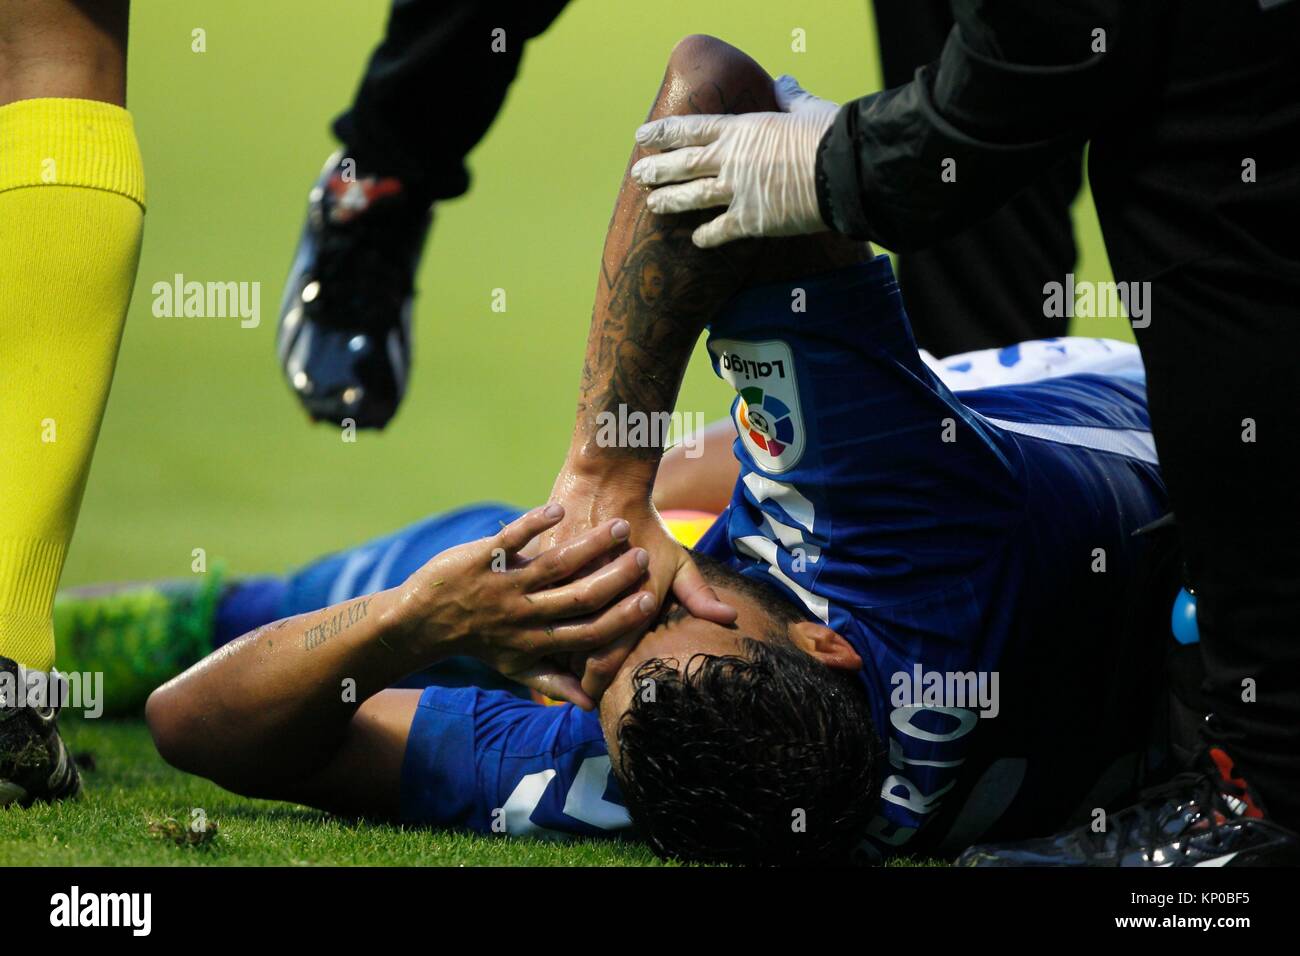 Second Division League Round 16 CD Lugo vs Tenerife, a player of Club Deportivo Tenerife, She complains on the ground after suffering a fault during Stock Photo